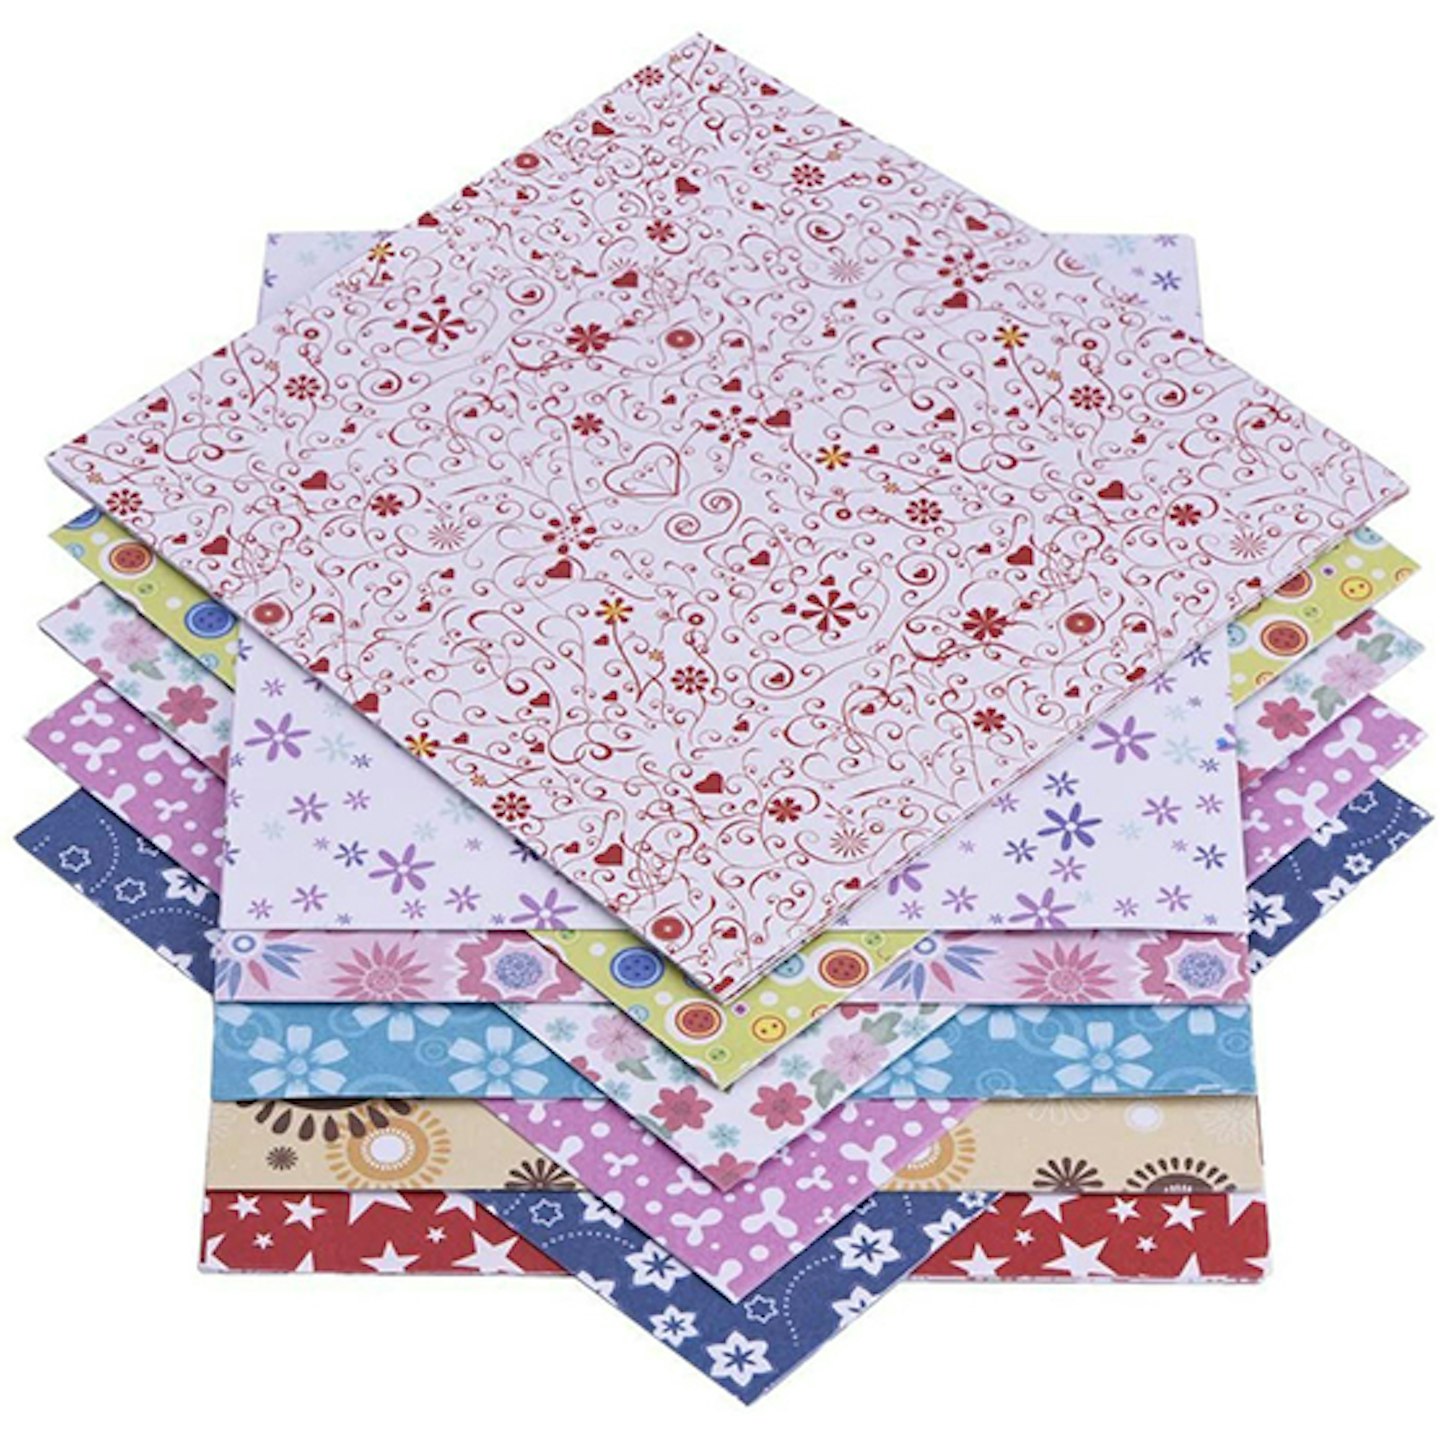 72 Sheets Origami Paper